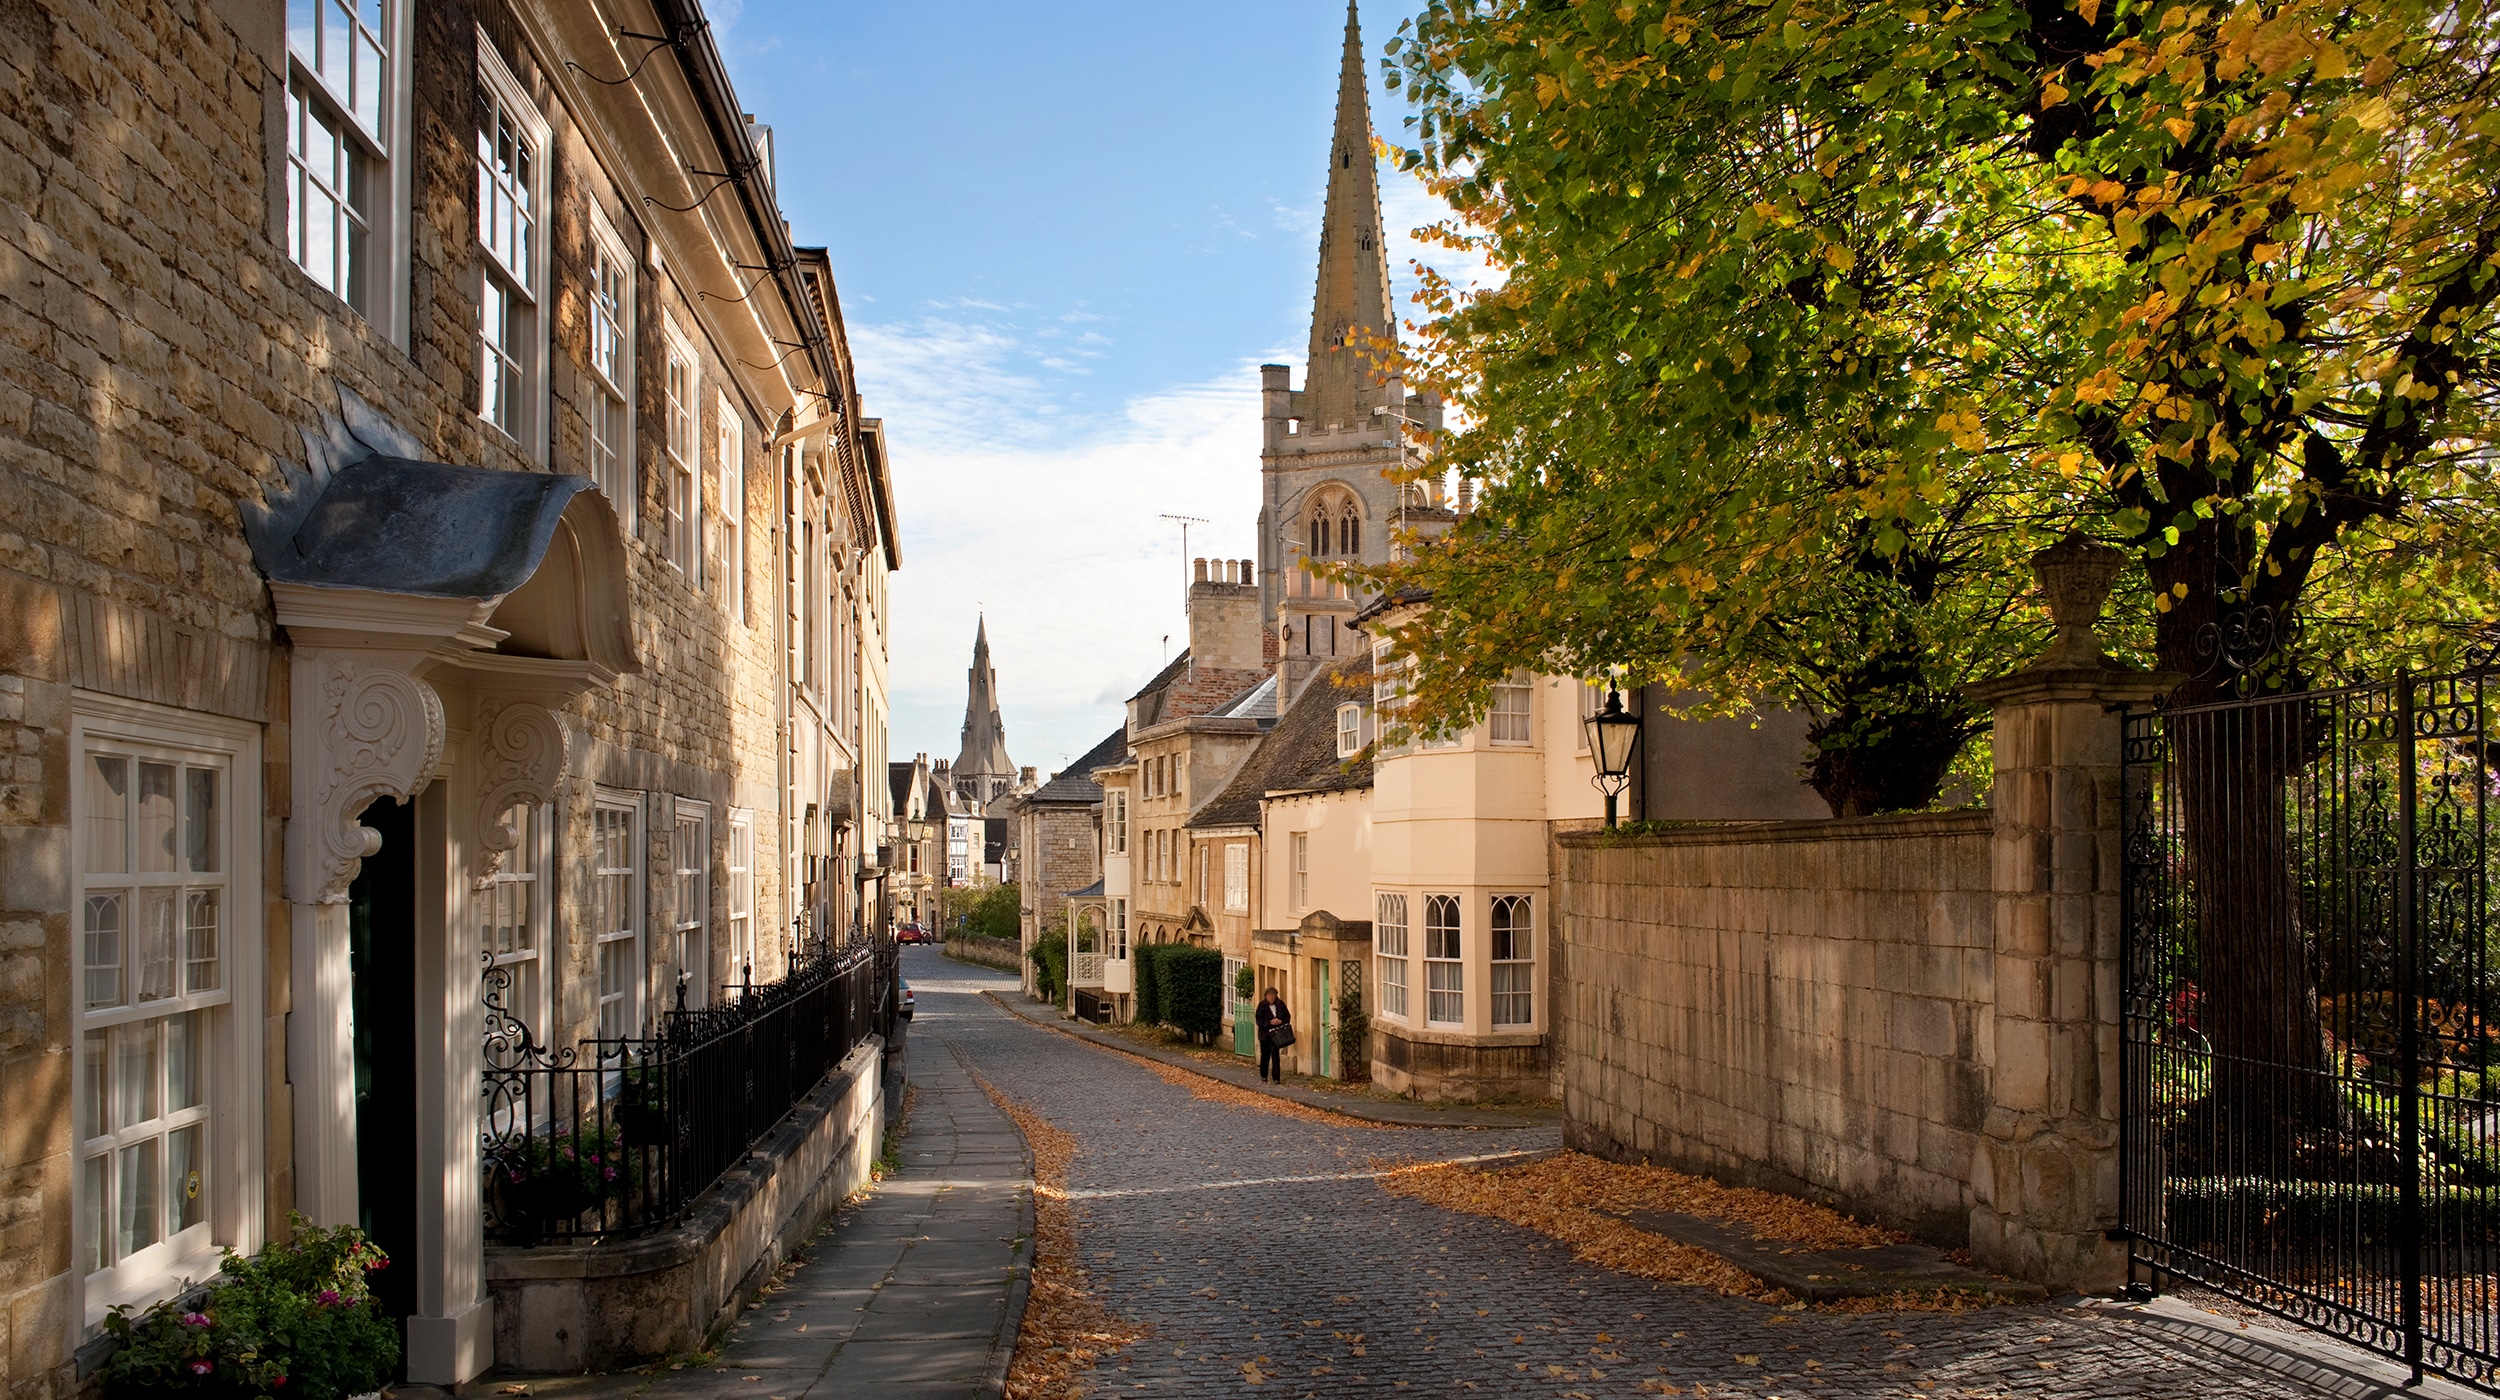 Barn Hill, Stamford. The Lincolnshire town is full of buttery Georgian architecture, excellent pubs and a vibrant shopping scene. Image: Getty Images